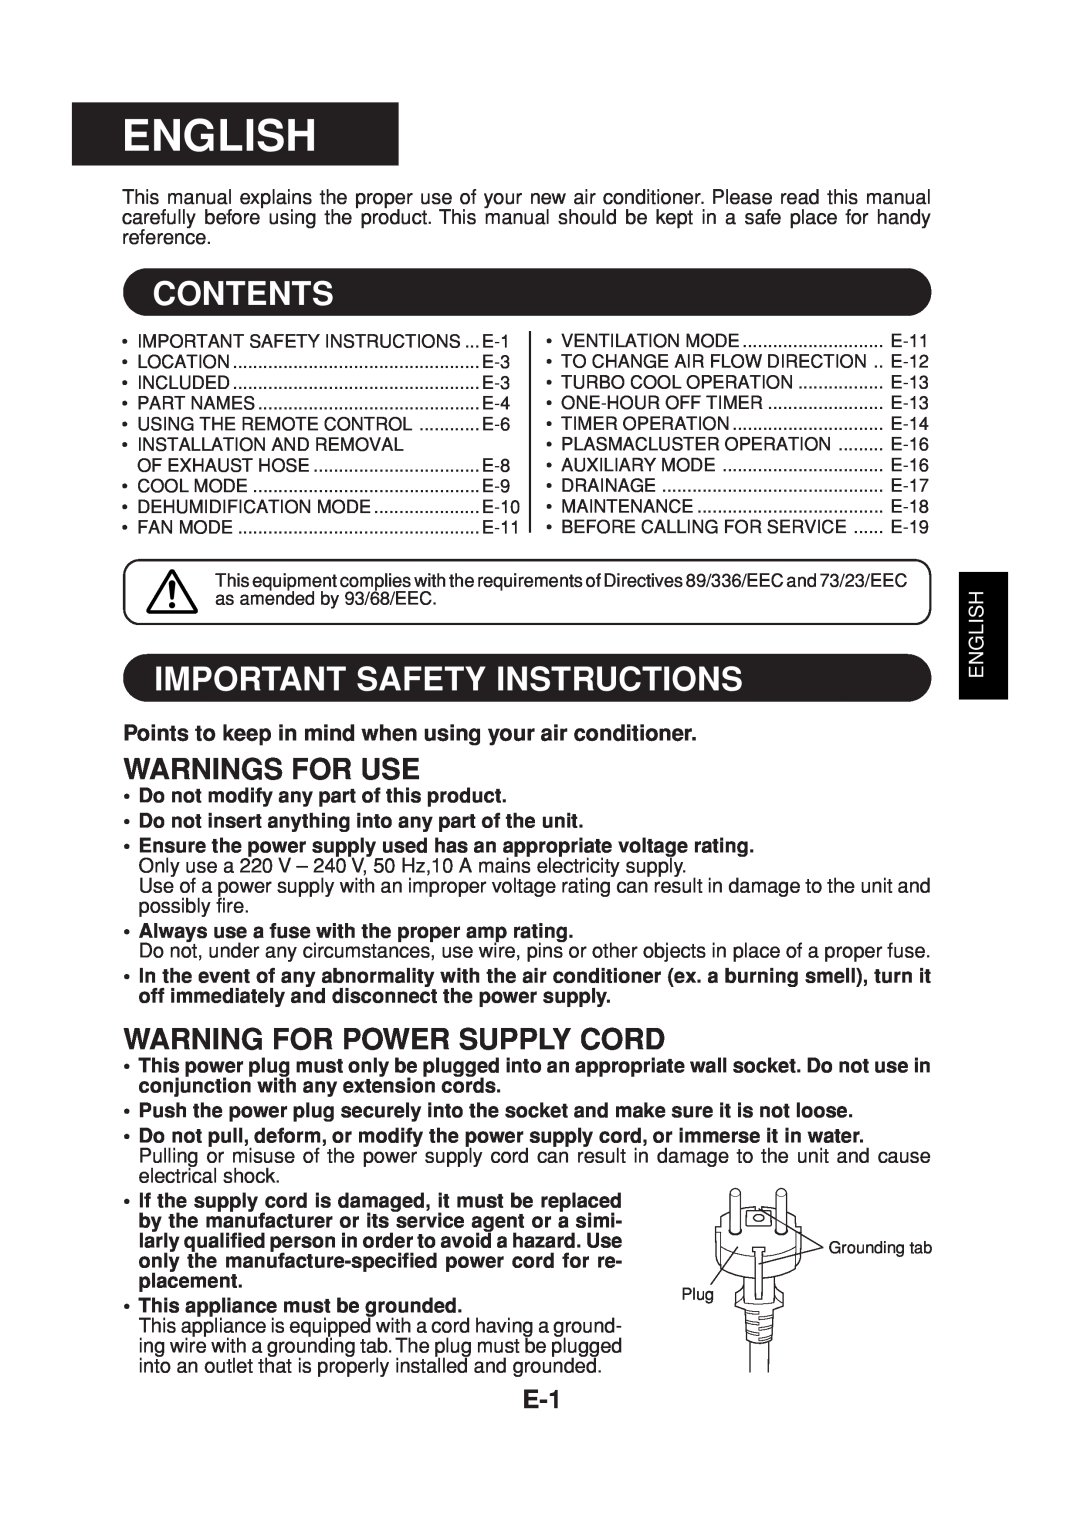 Sharp CV-P09FR Contents, Important Safety Instructions, Warnings For Use, Warning For Power Supply Cord, English 